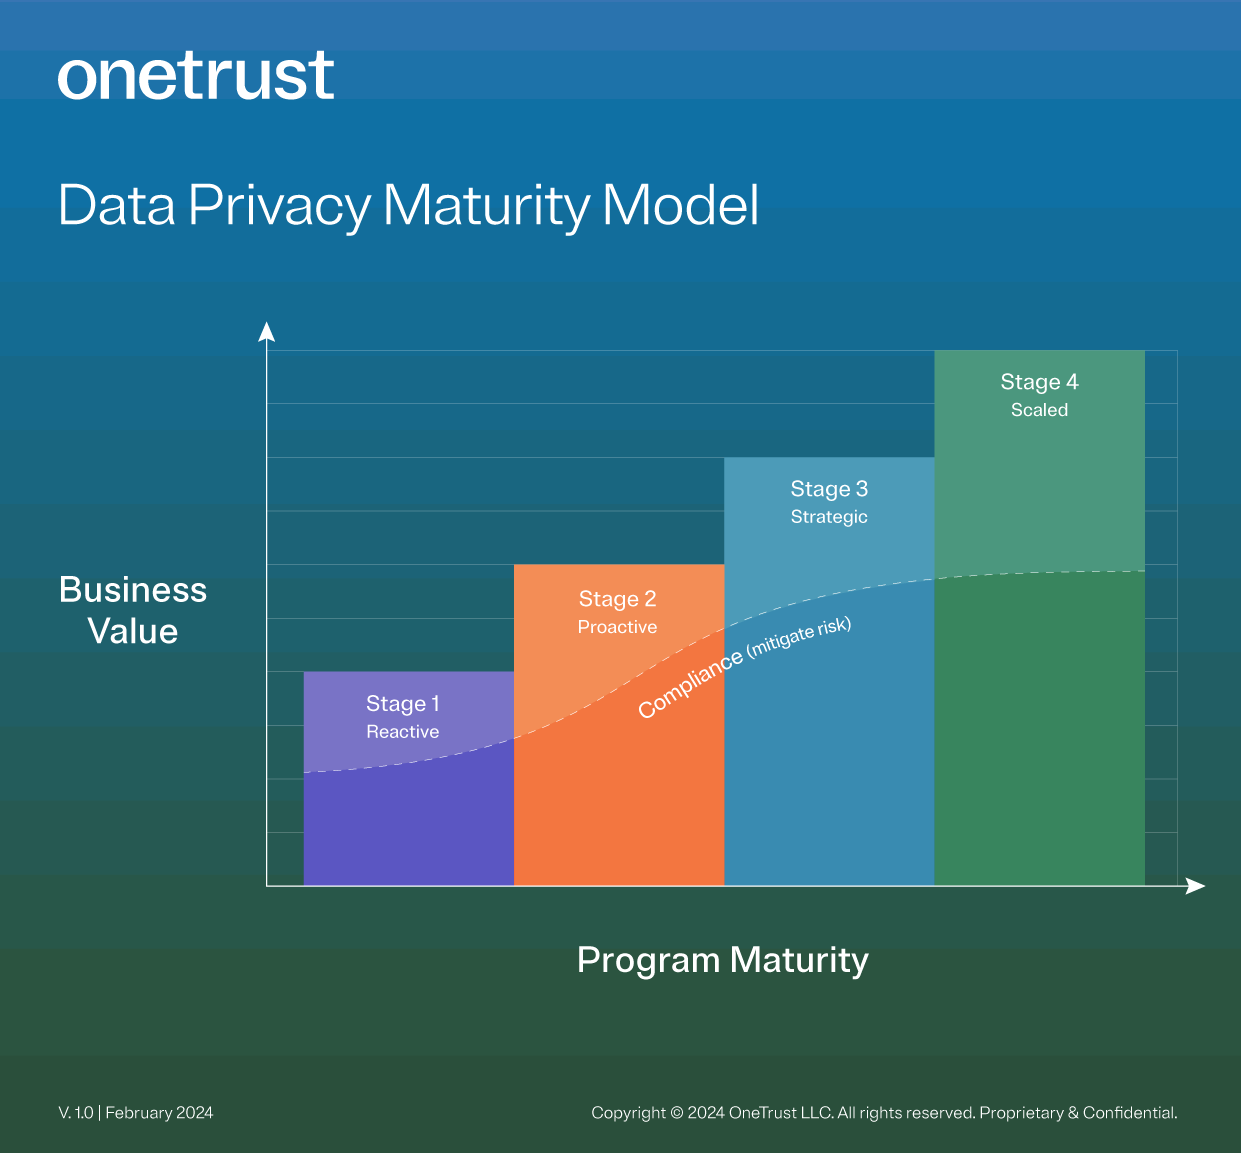 Bar graph showing the how the compliance curve relates to the different stages of the data privacy maturity model, with the curve rising in the second and third stages before leveling in the fourth stage.